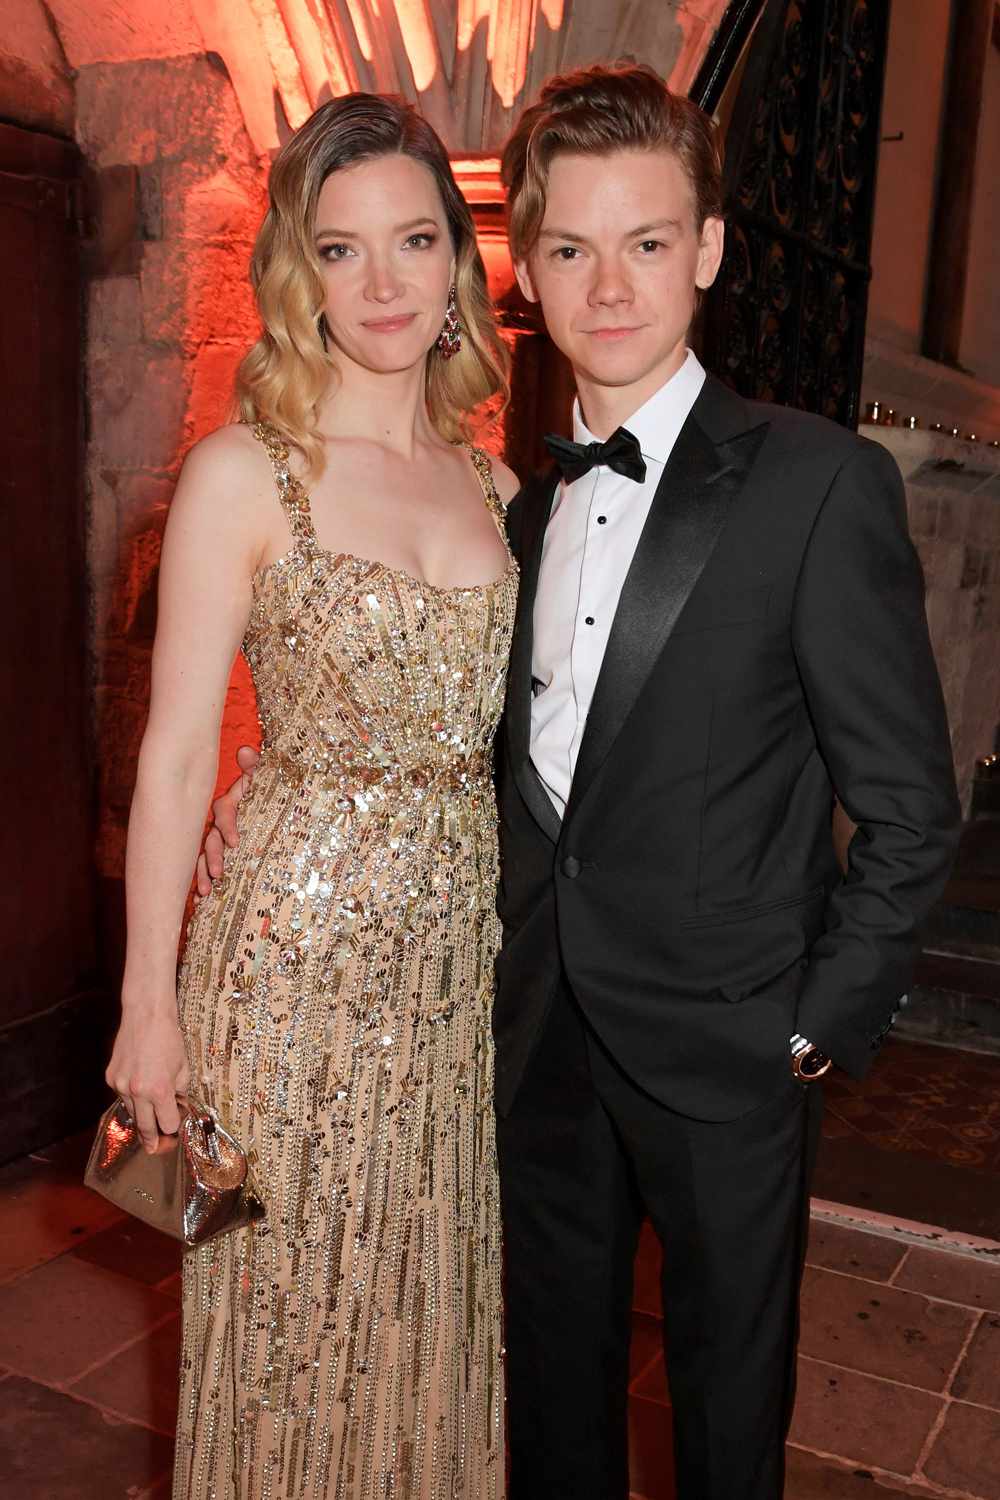 Thomas Brodie-Sangster and Talulah Riley's Relationship Timeline